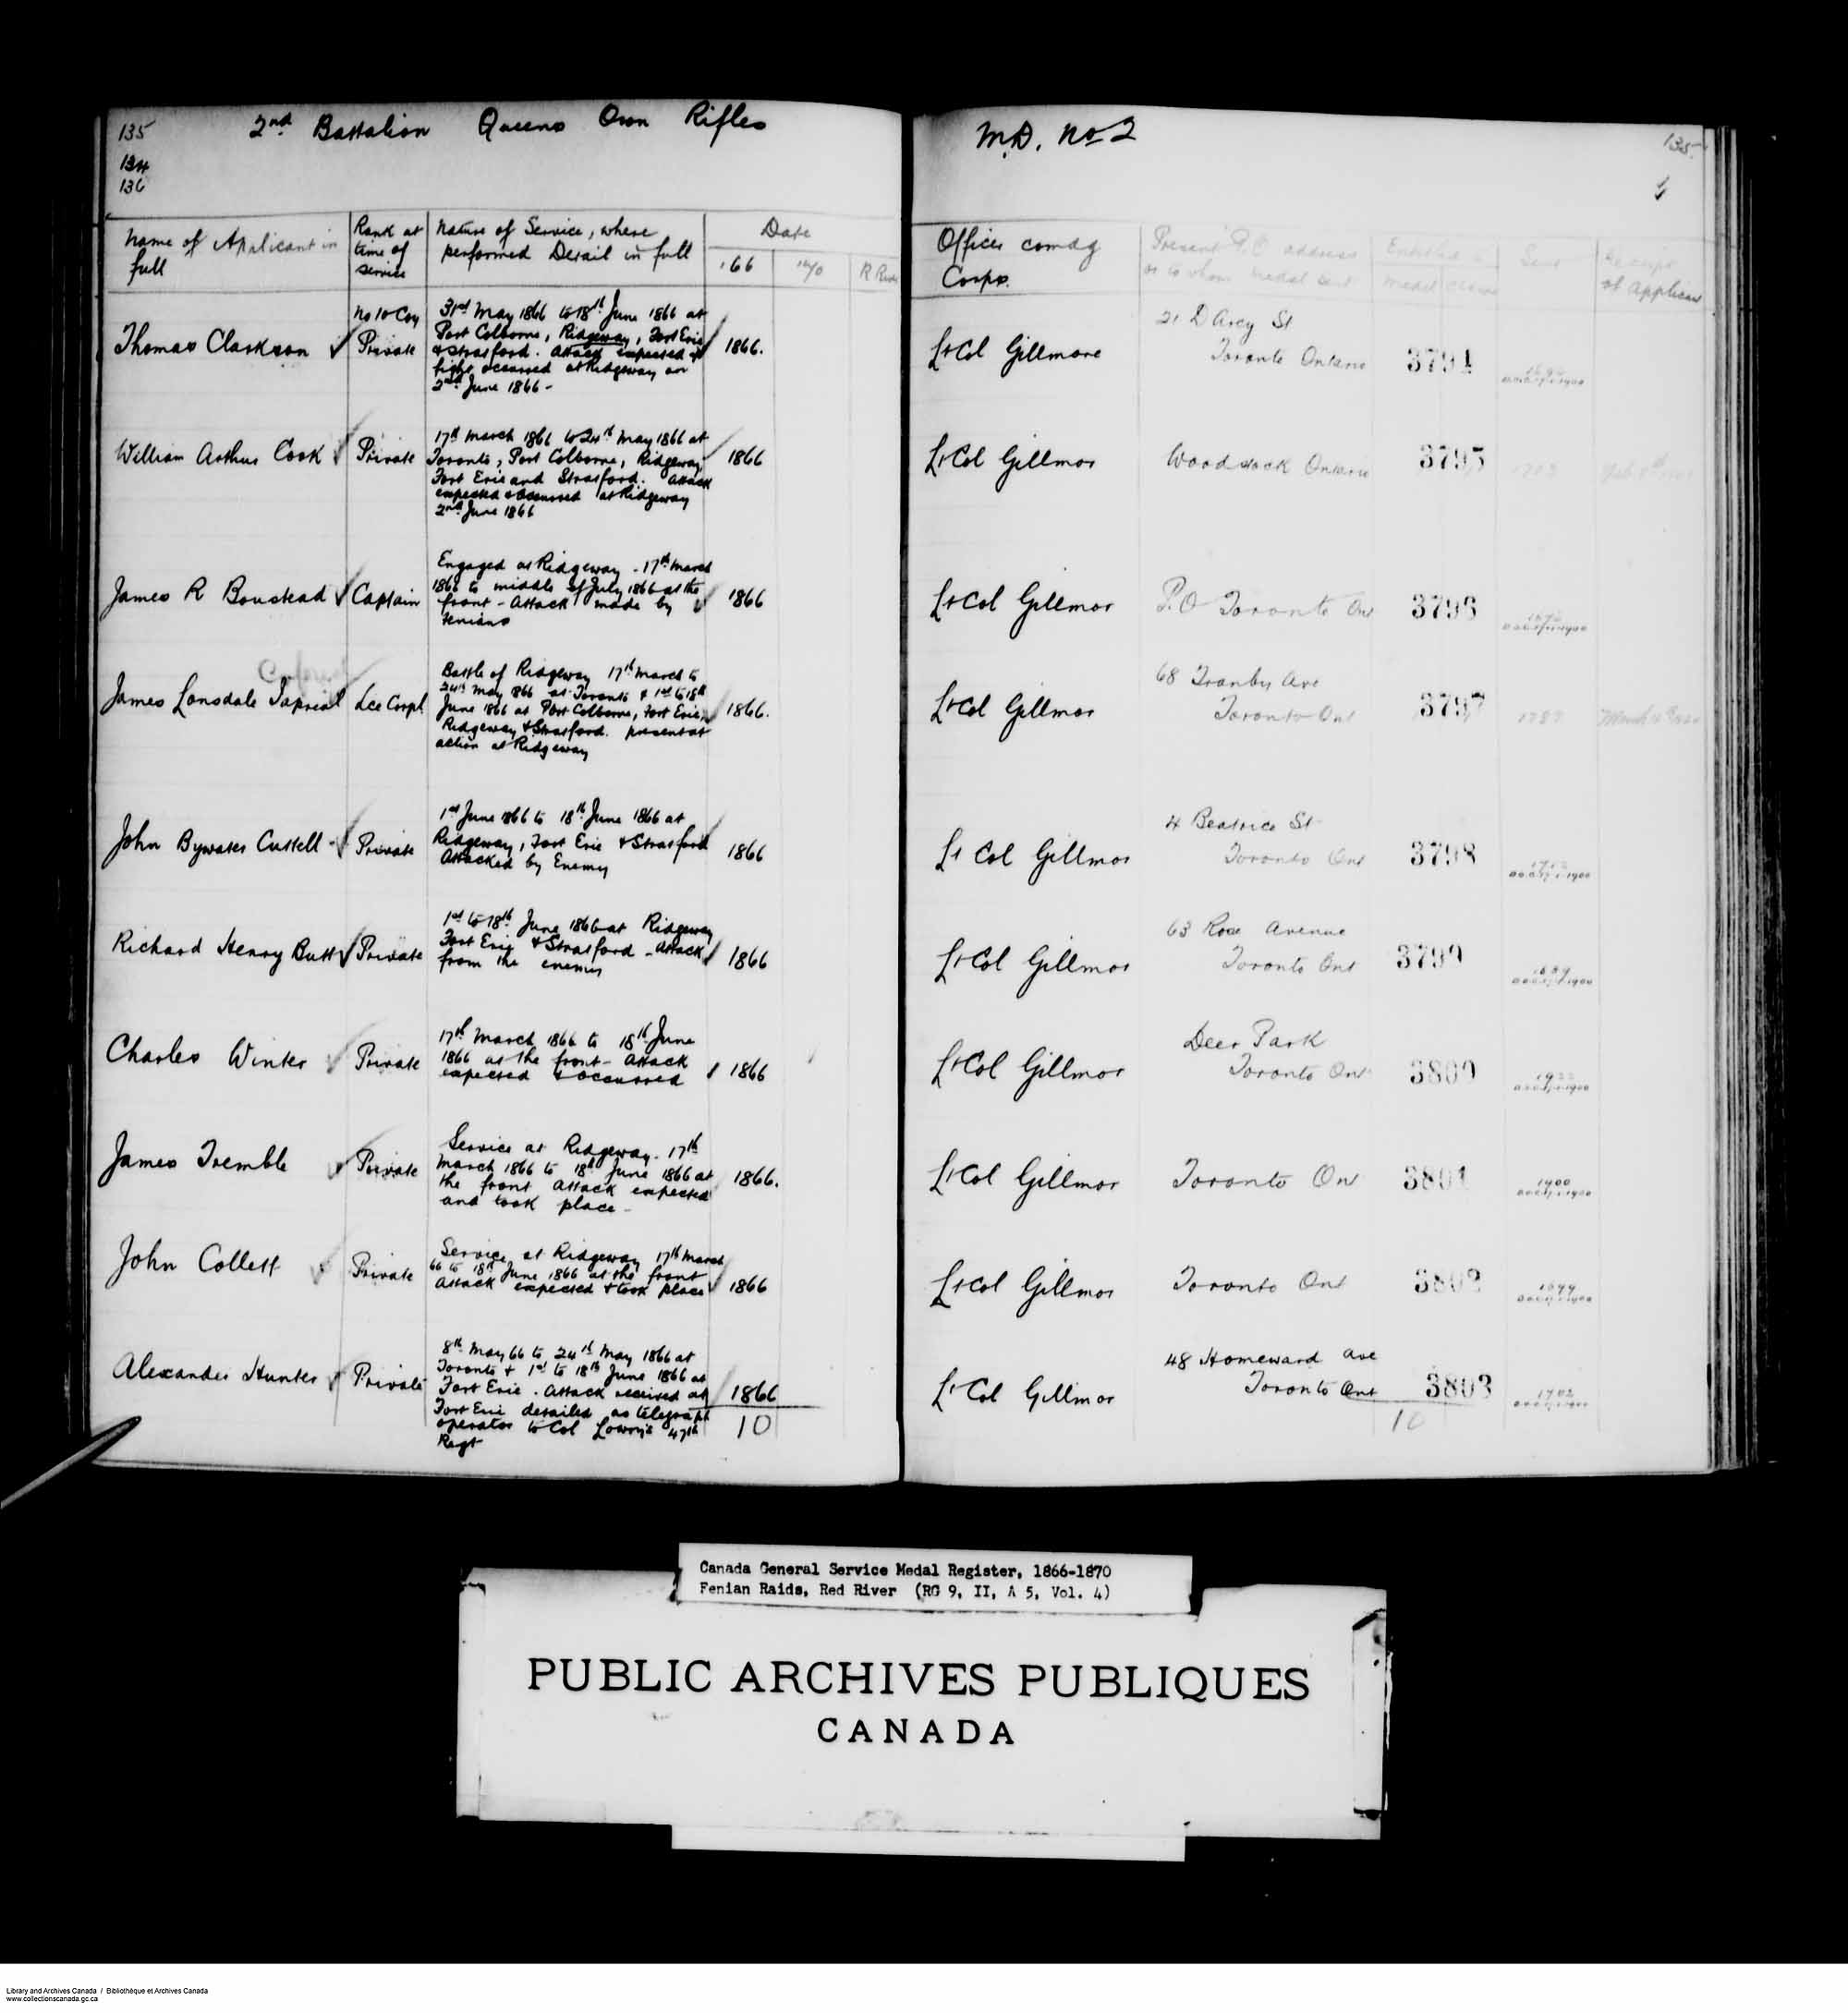 Digitized page of Medals, Honours and Awards for Image No.: e008681822